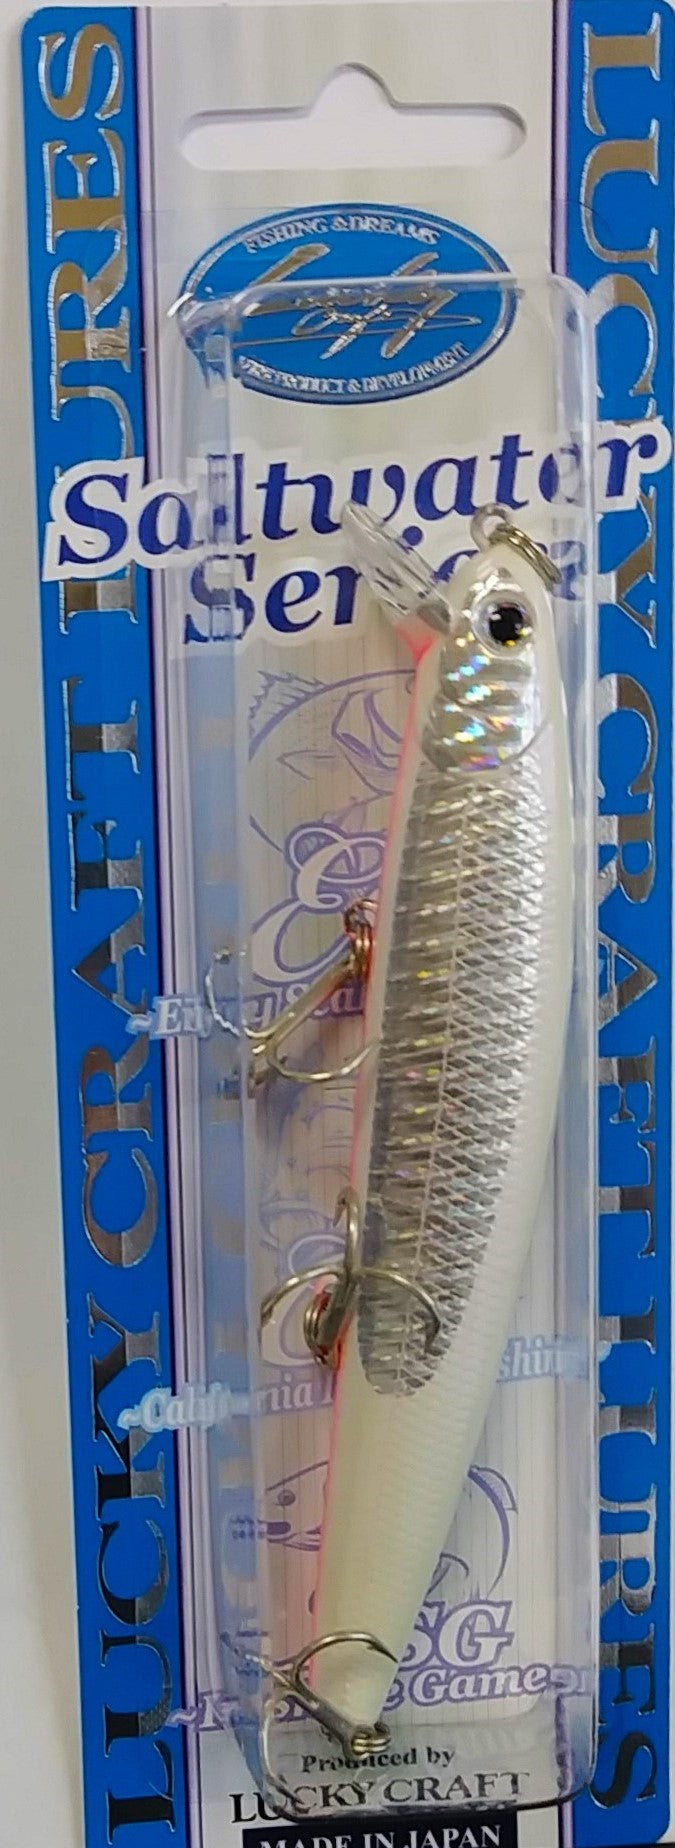 Lucky Craft FlashMinnow Saltwater Fishing Lure (Model: 110 / Pearl White)